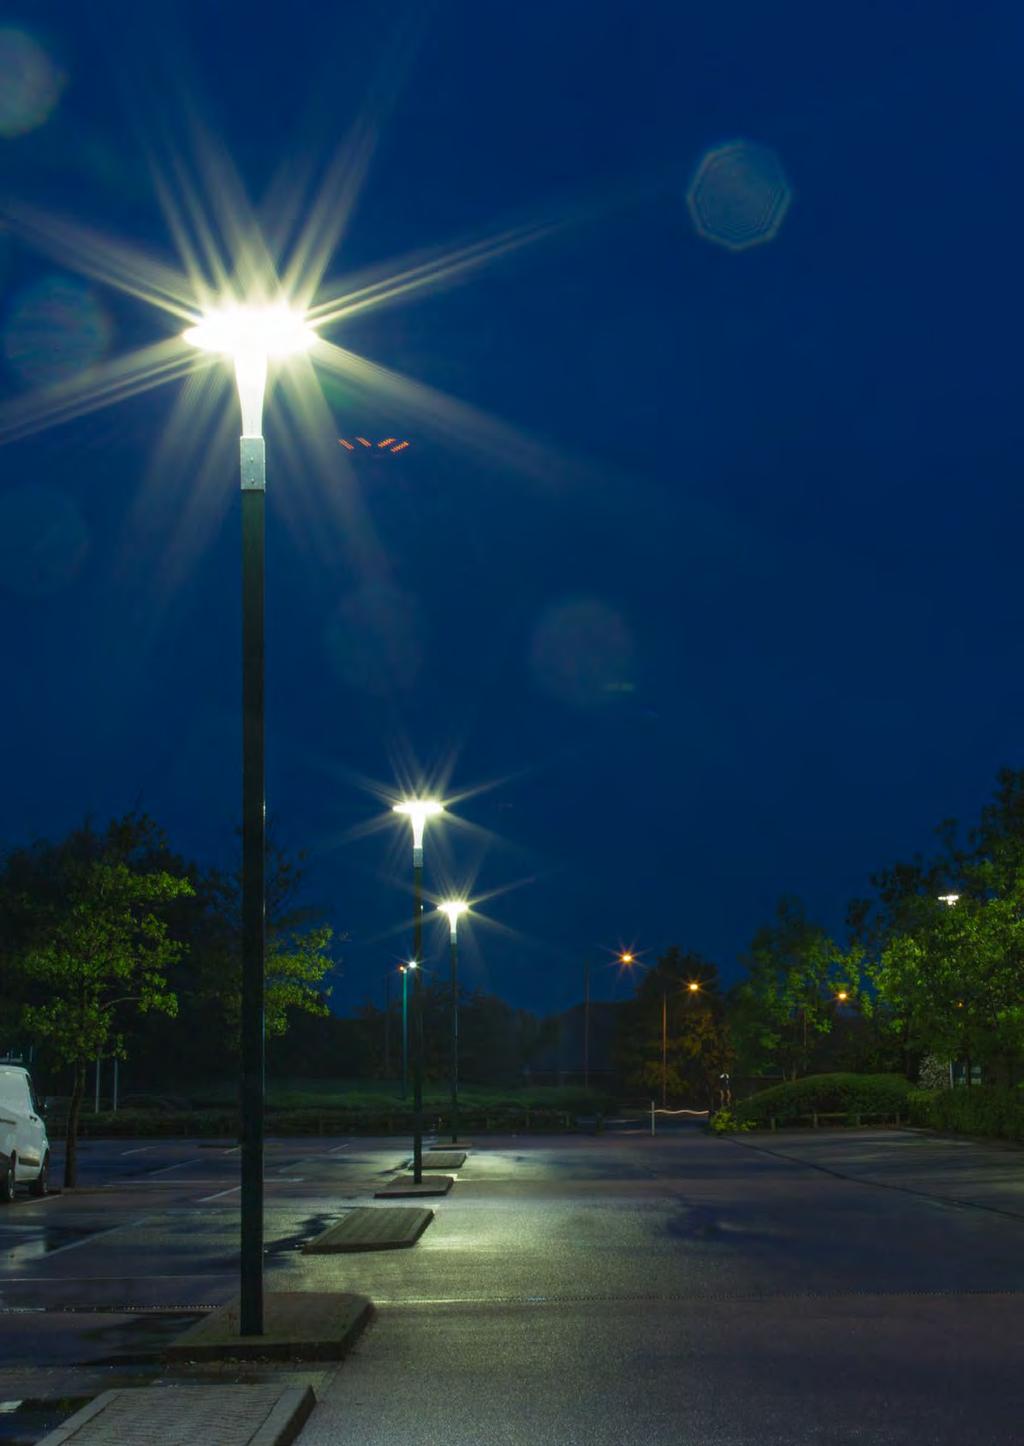 ABACUS LIGHTING ORION LED FIRST CHOICE FOR RETAIL THE NEXT STEP Following Abacus s success with our specially designed Orion series, the Orion LED is the next step for effective and efficient car